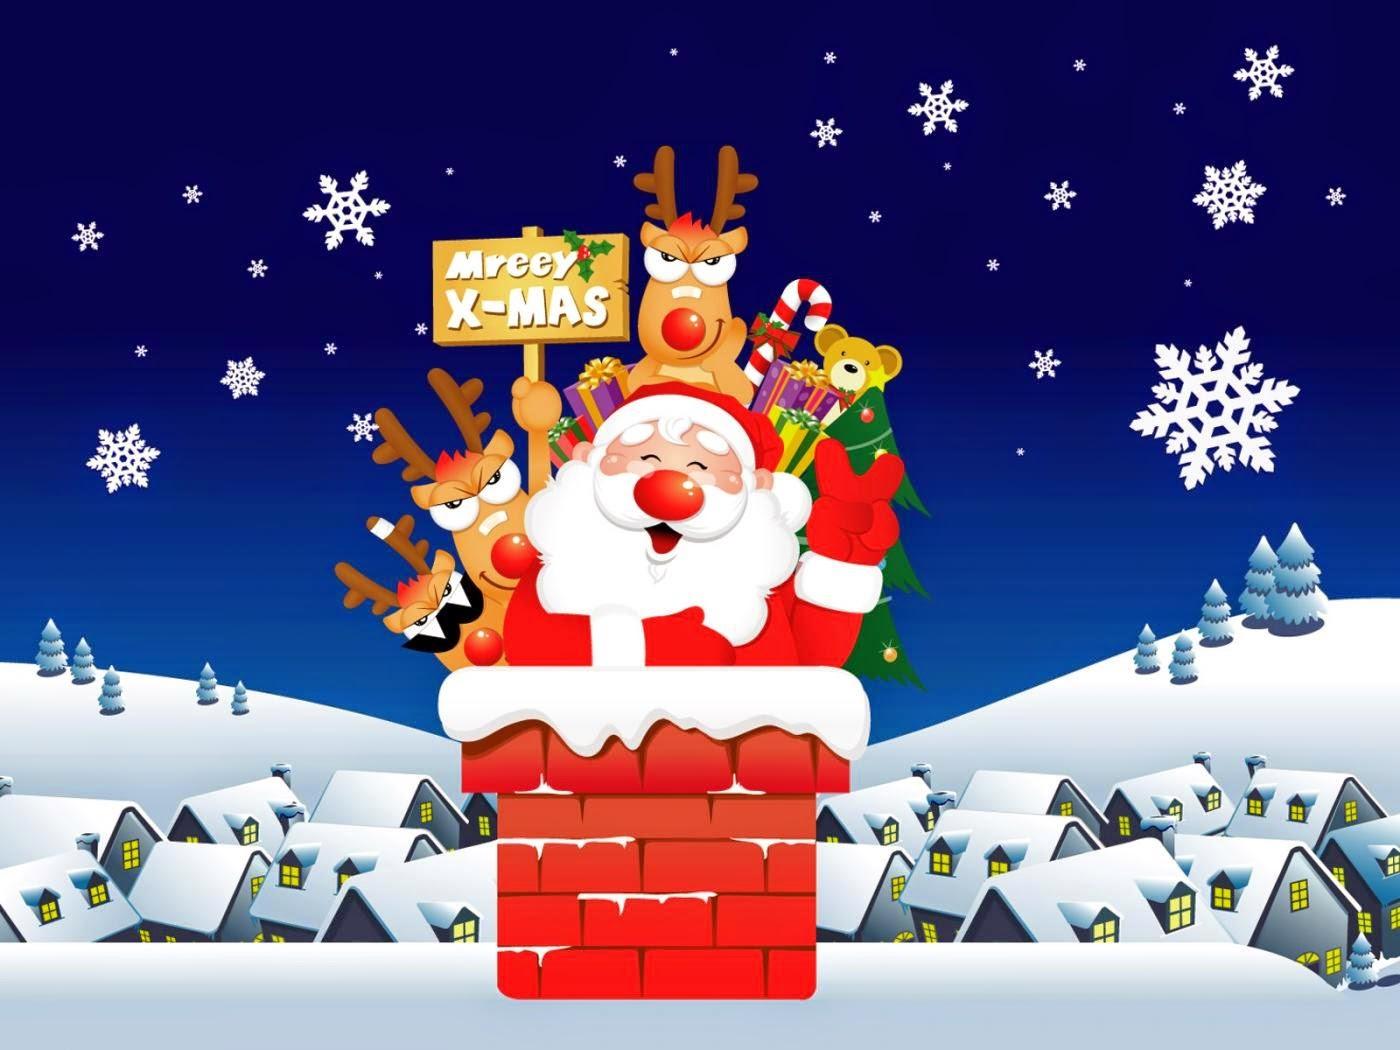 Funny Santa Claus Cartoon Picture Christmas Image